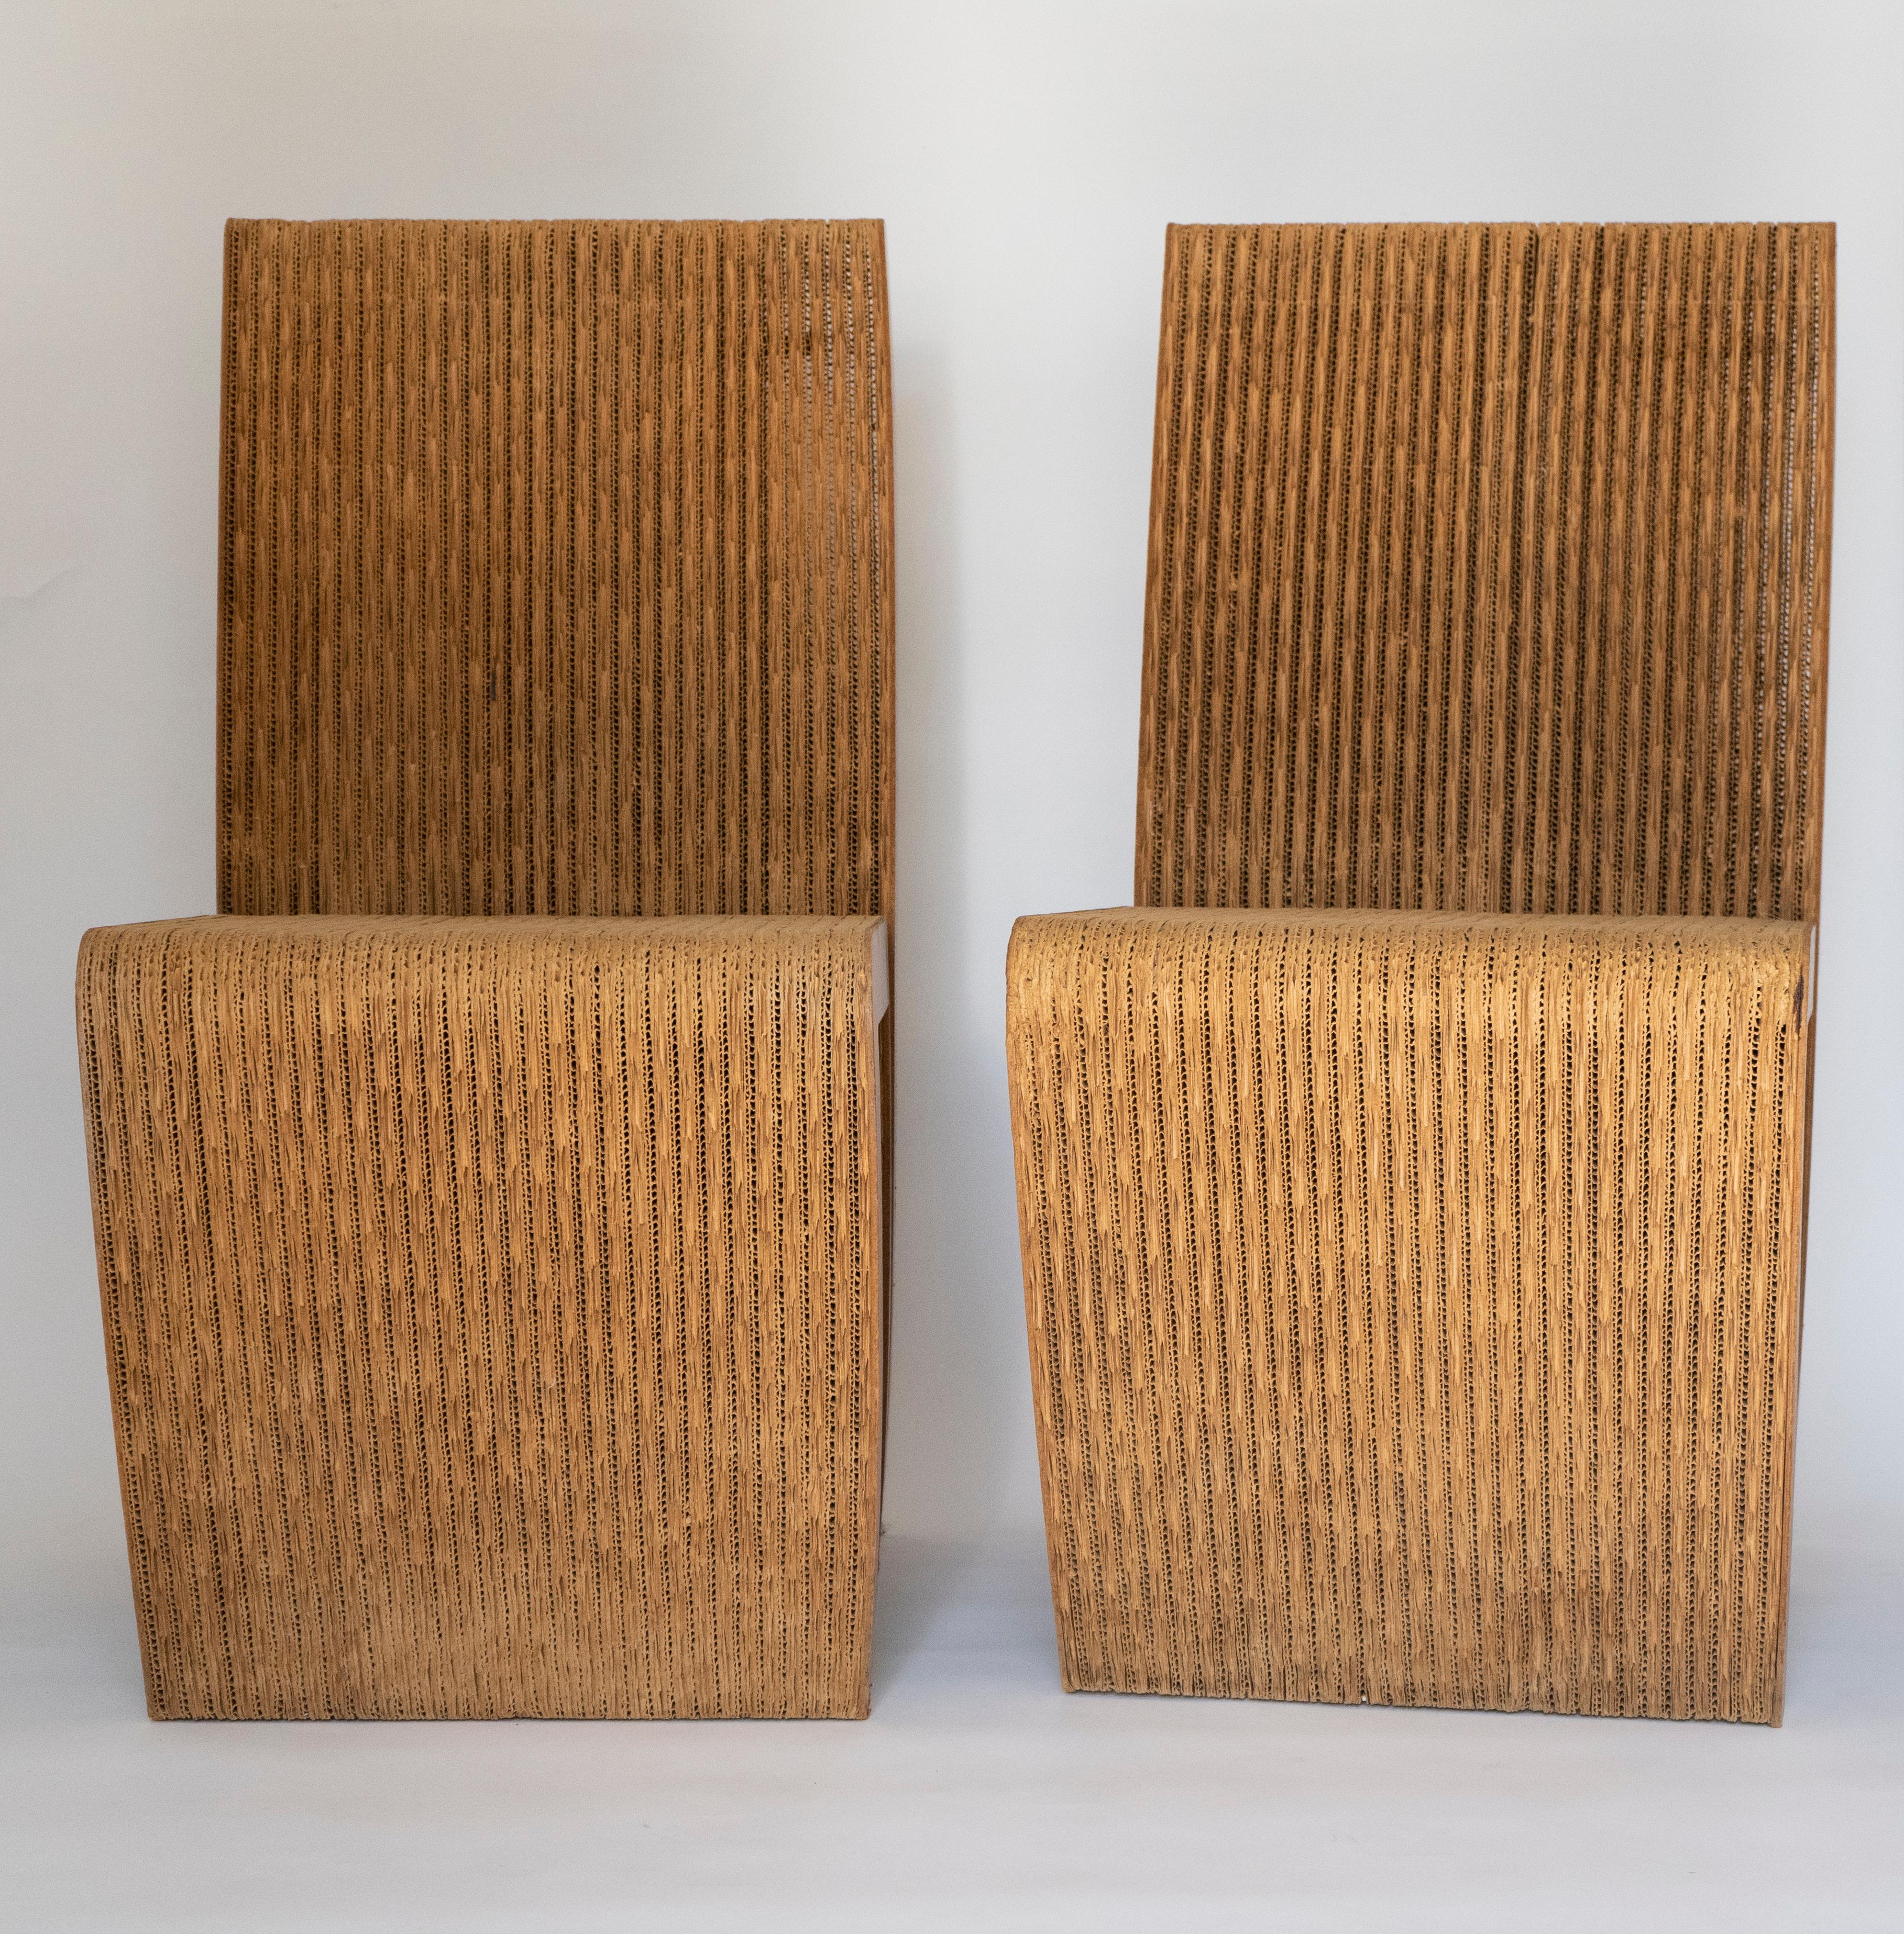 1970s model of Frank Gehry's remarkable cardboard constructed chair from the Easy Edges collection. Initially offered for only two years in the 1970s. The construction method makes the chairs both sturdy and visually striking. This is a great